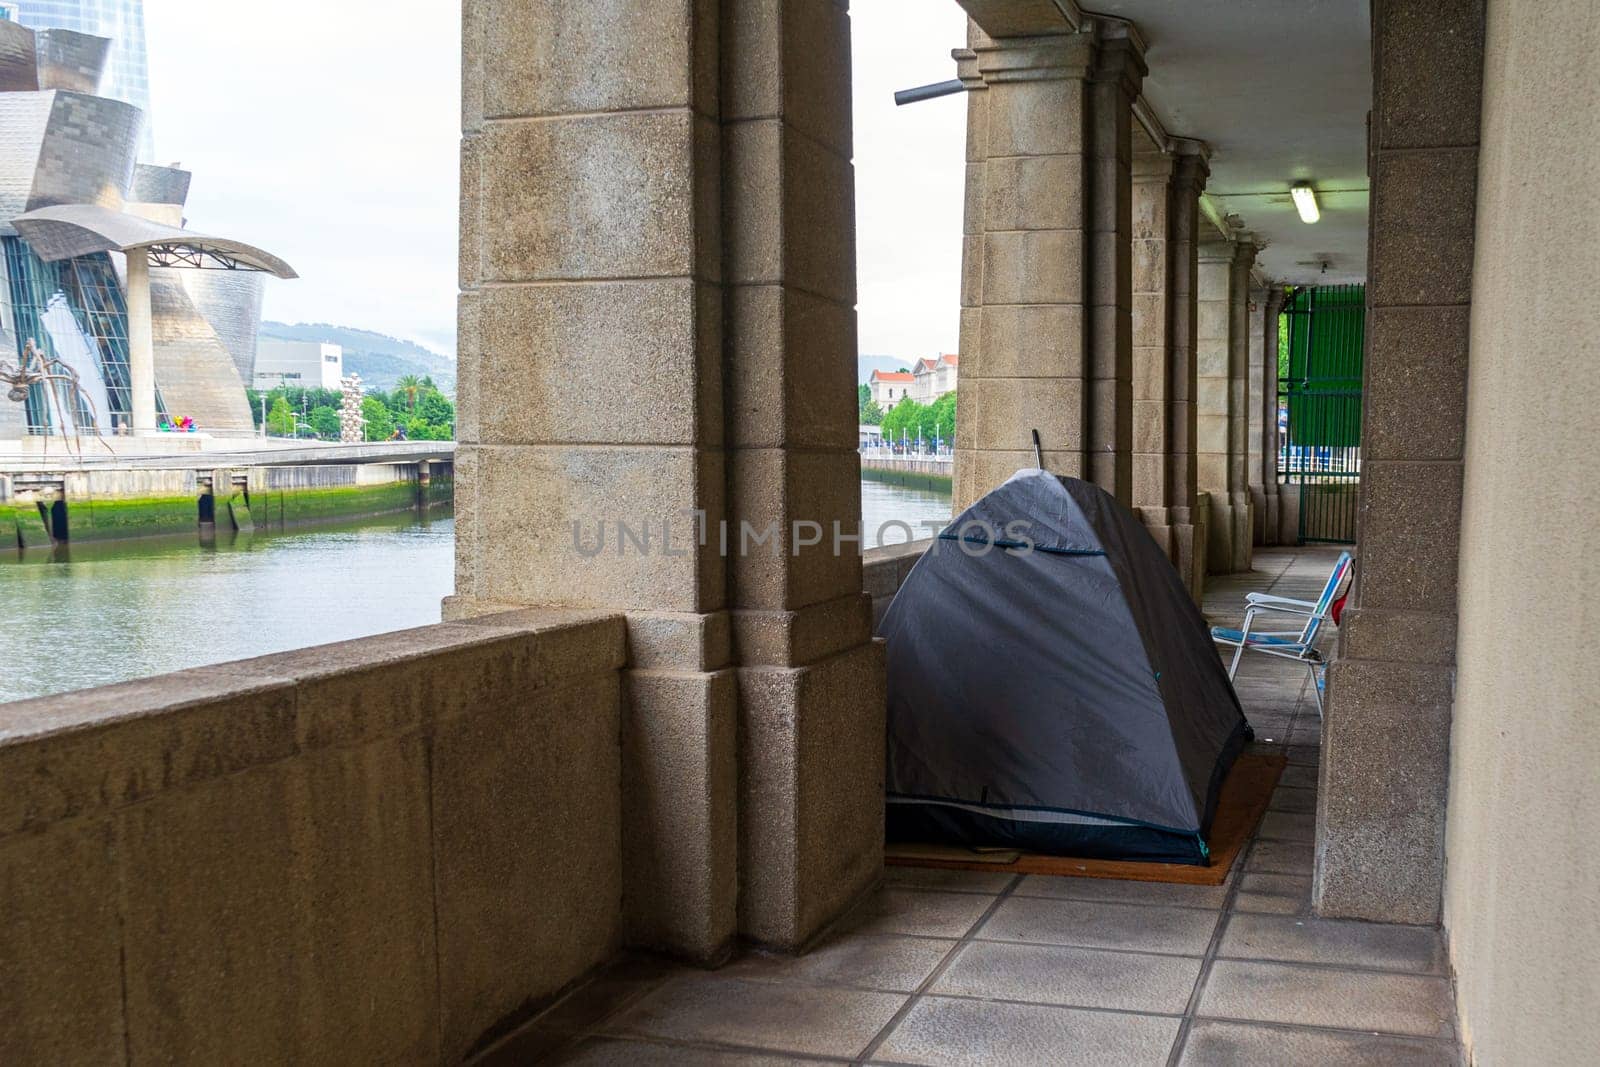 Tourist tent stands in the city, homeless overnight in Bilbao, Basque Country, Spain